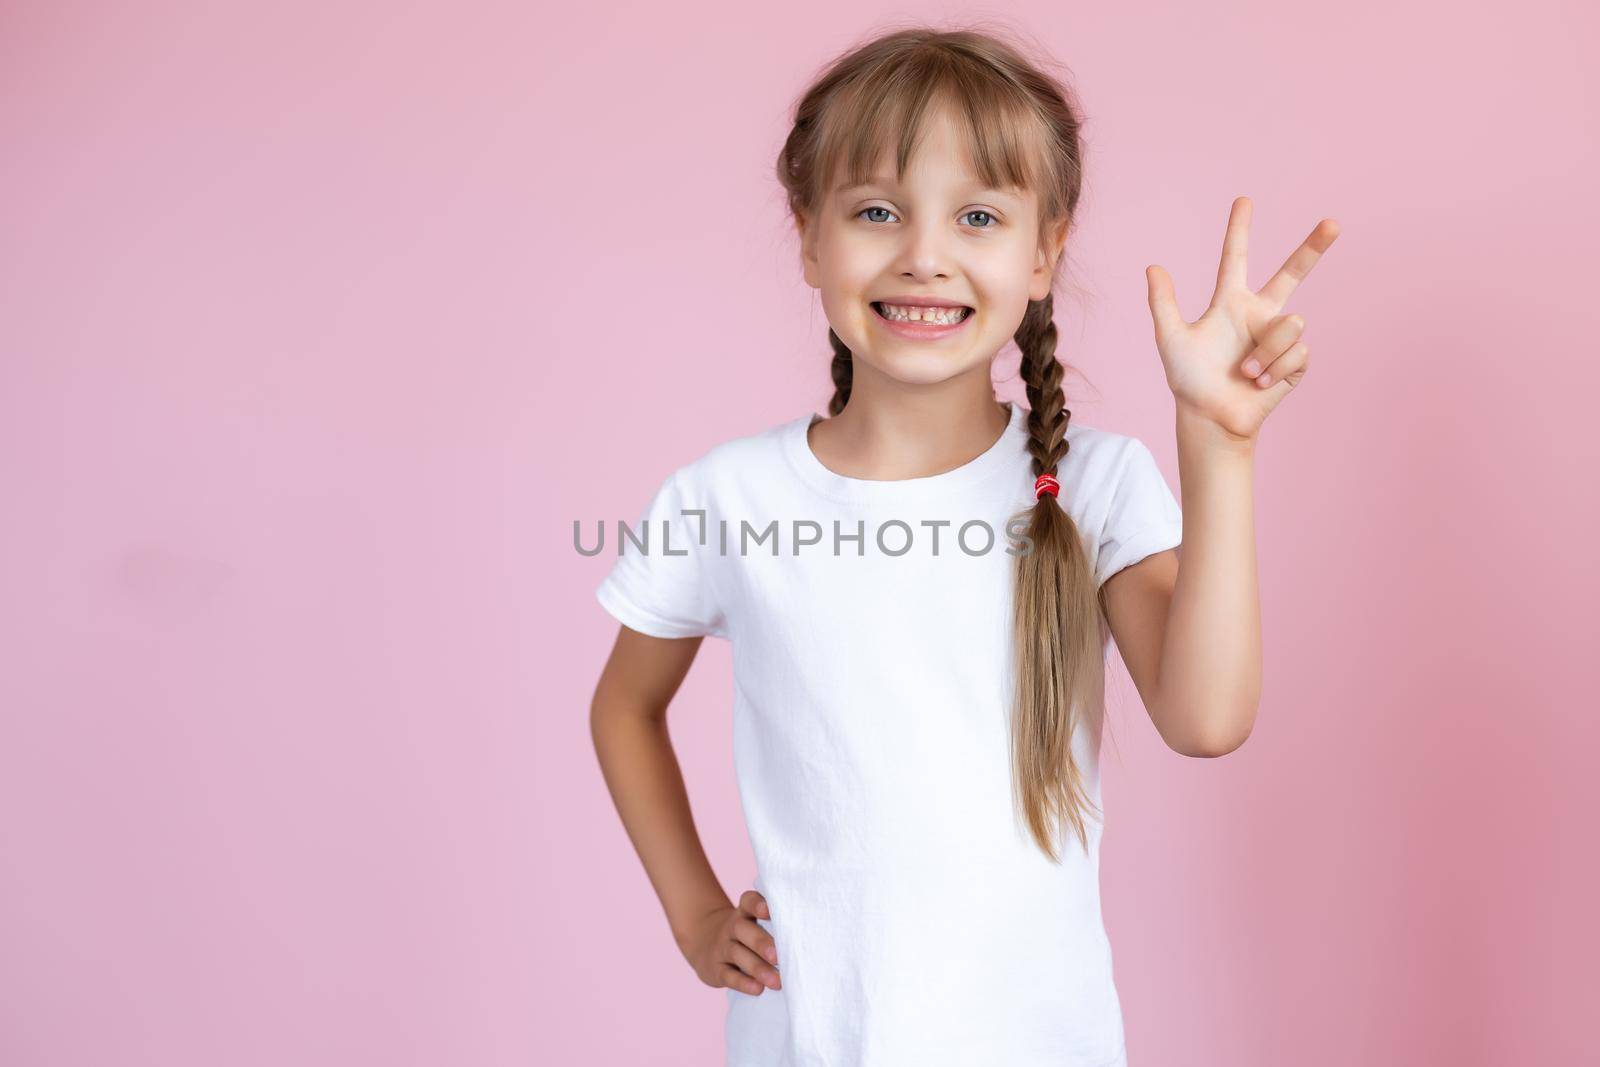 Beautiful little blonde girl with long hair in white T-shirt smiling on a pink background